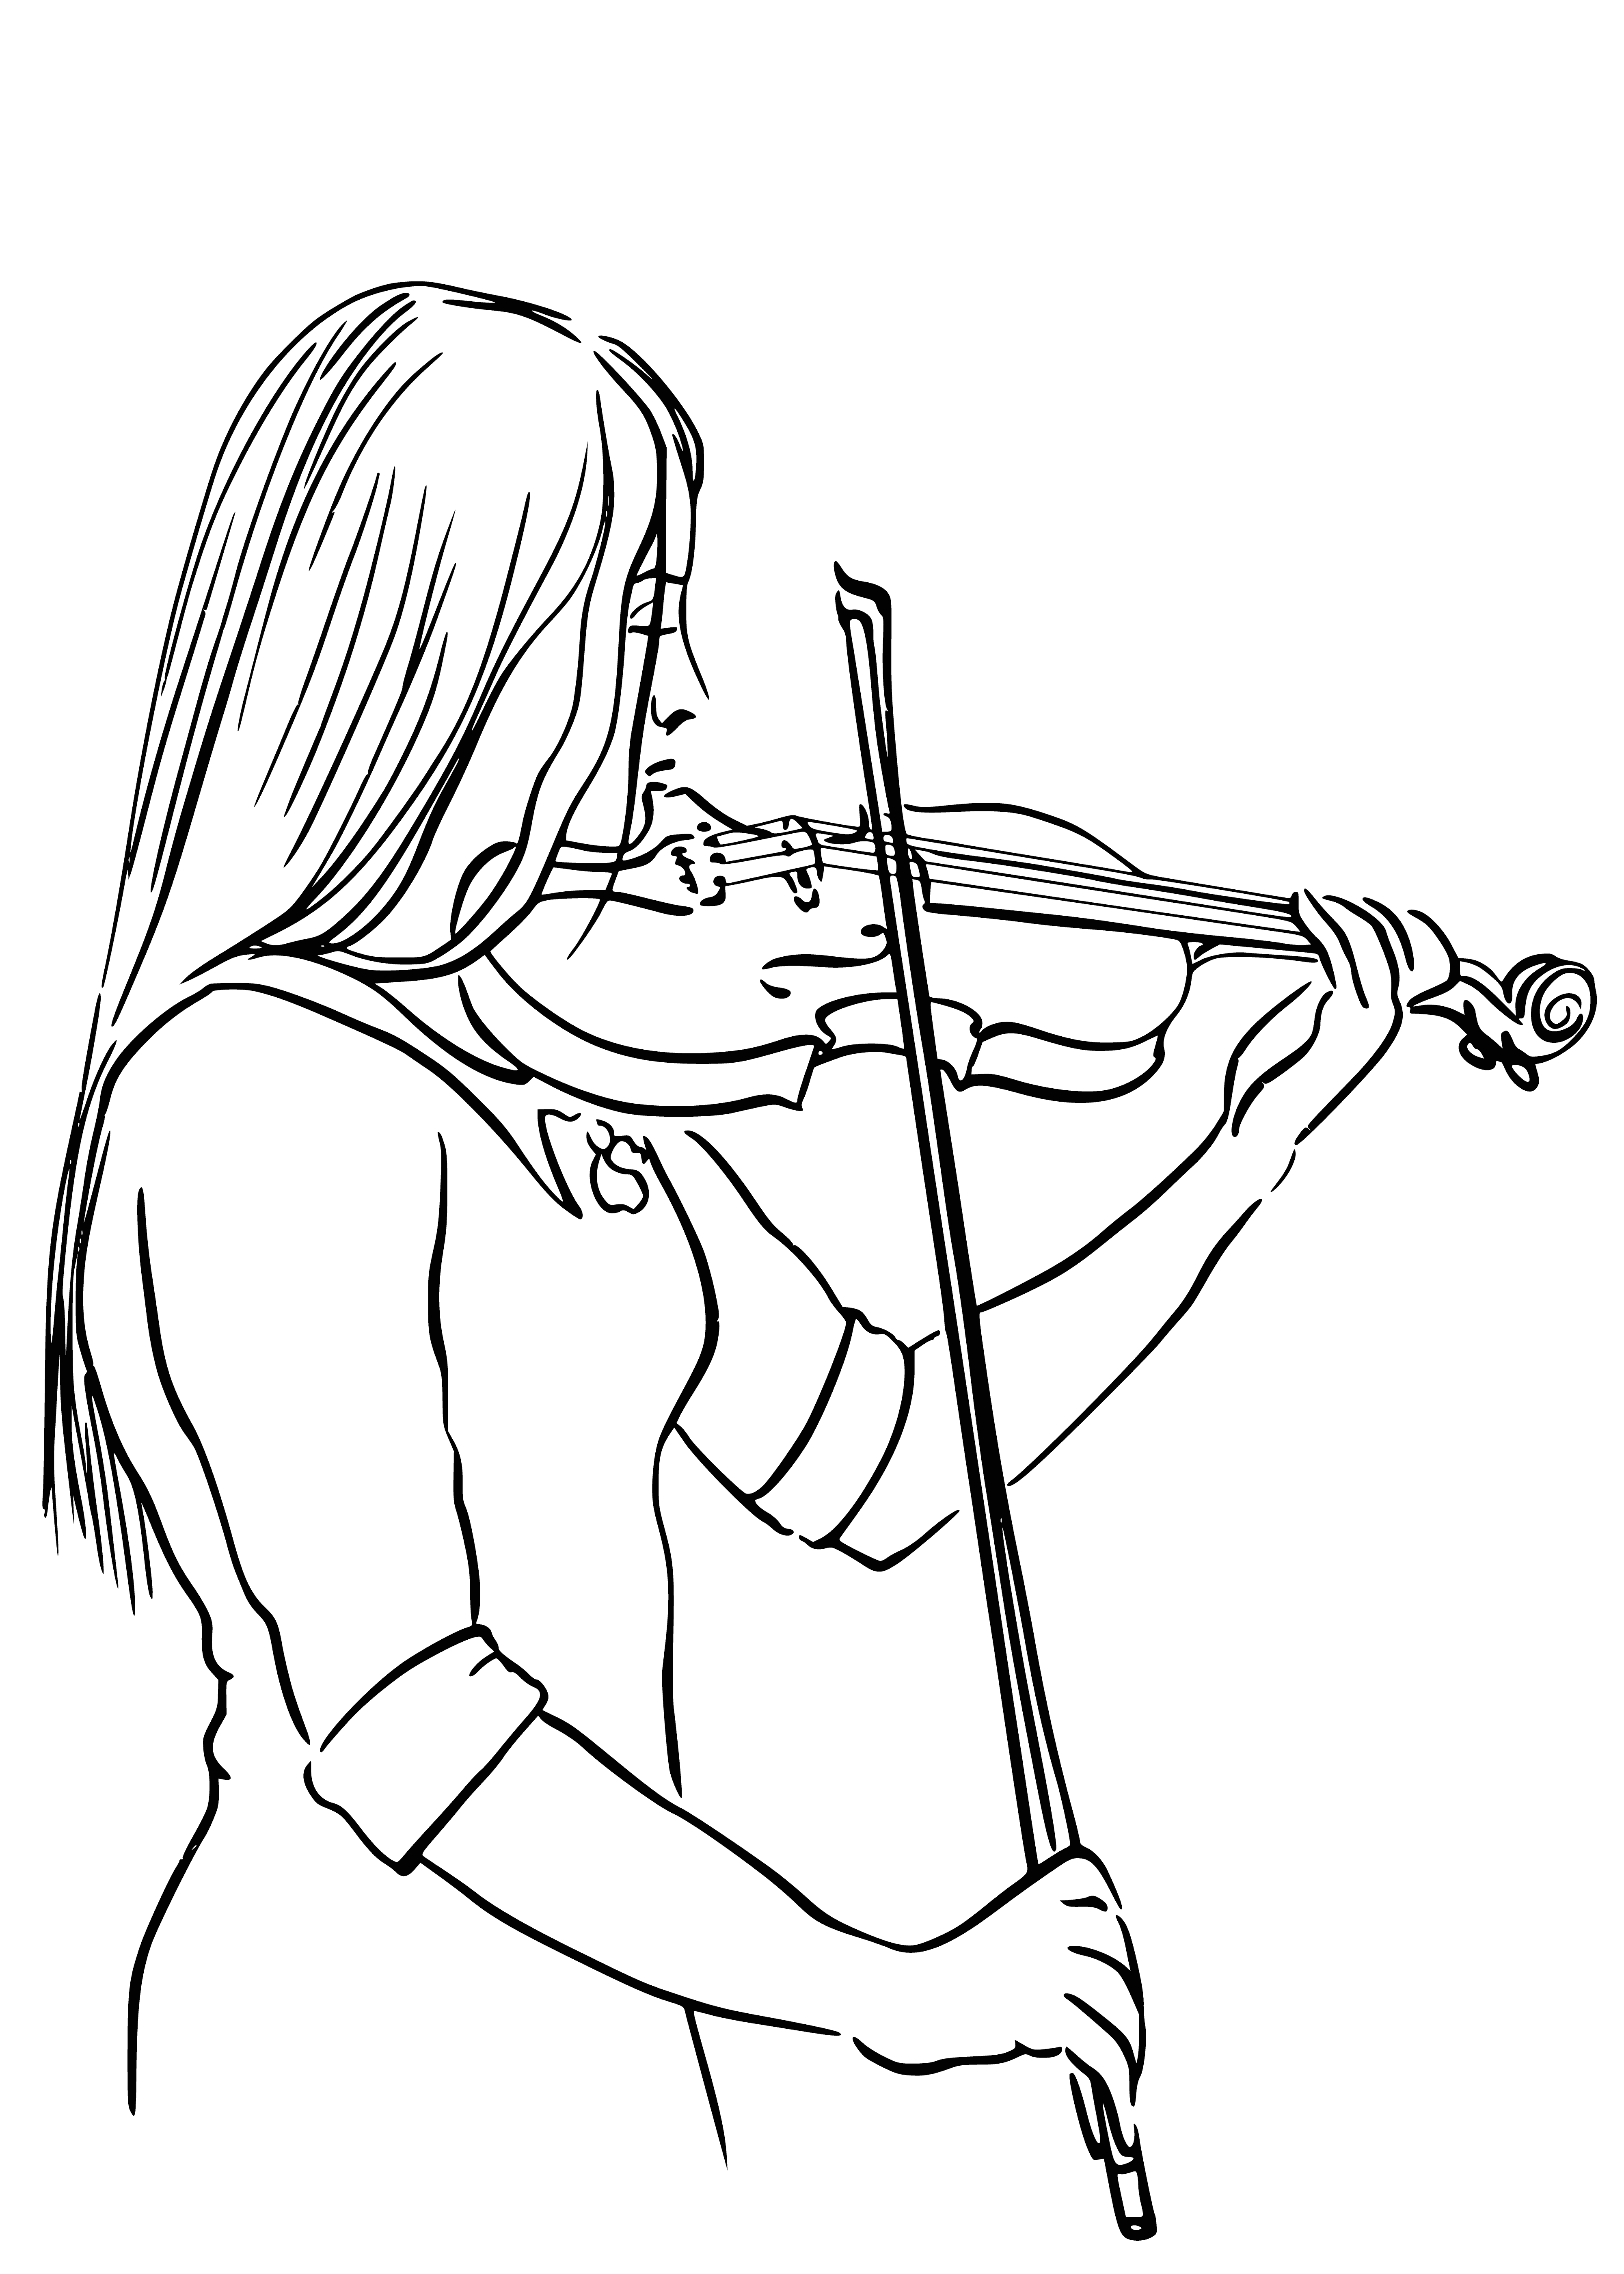 coloring page: Coloring page of a violinist standing in front of a music stand holding a violin and bow, with sheet music and a chair beside them. #coloring #violin